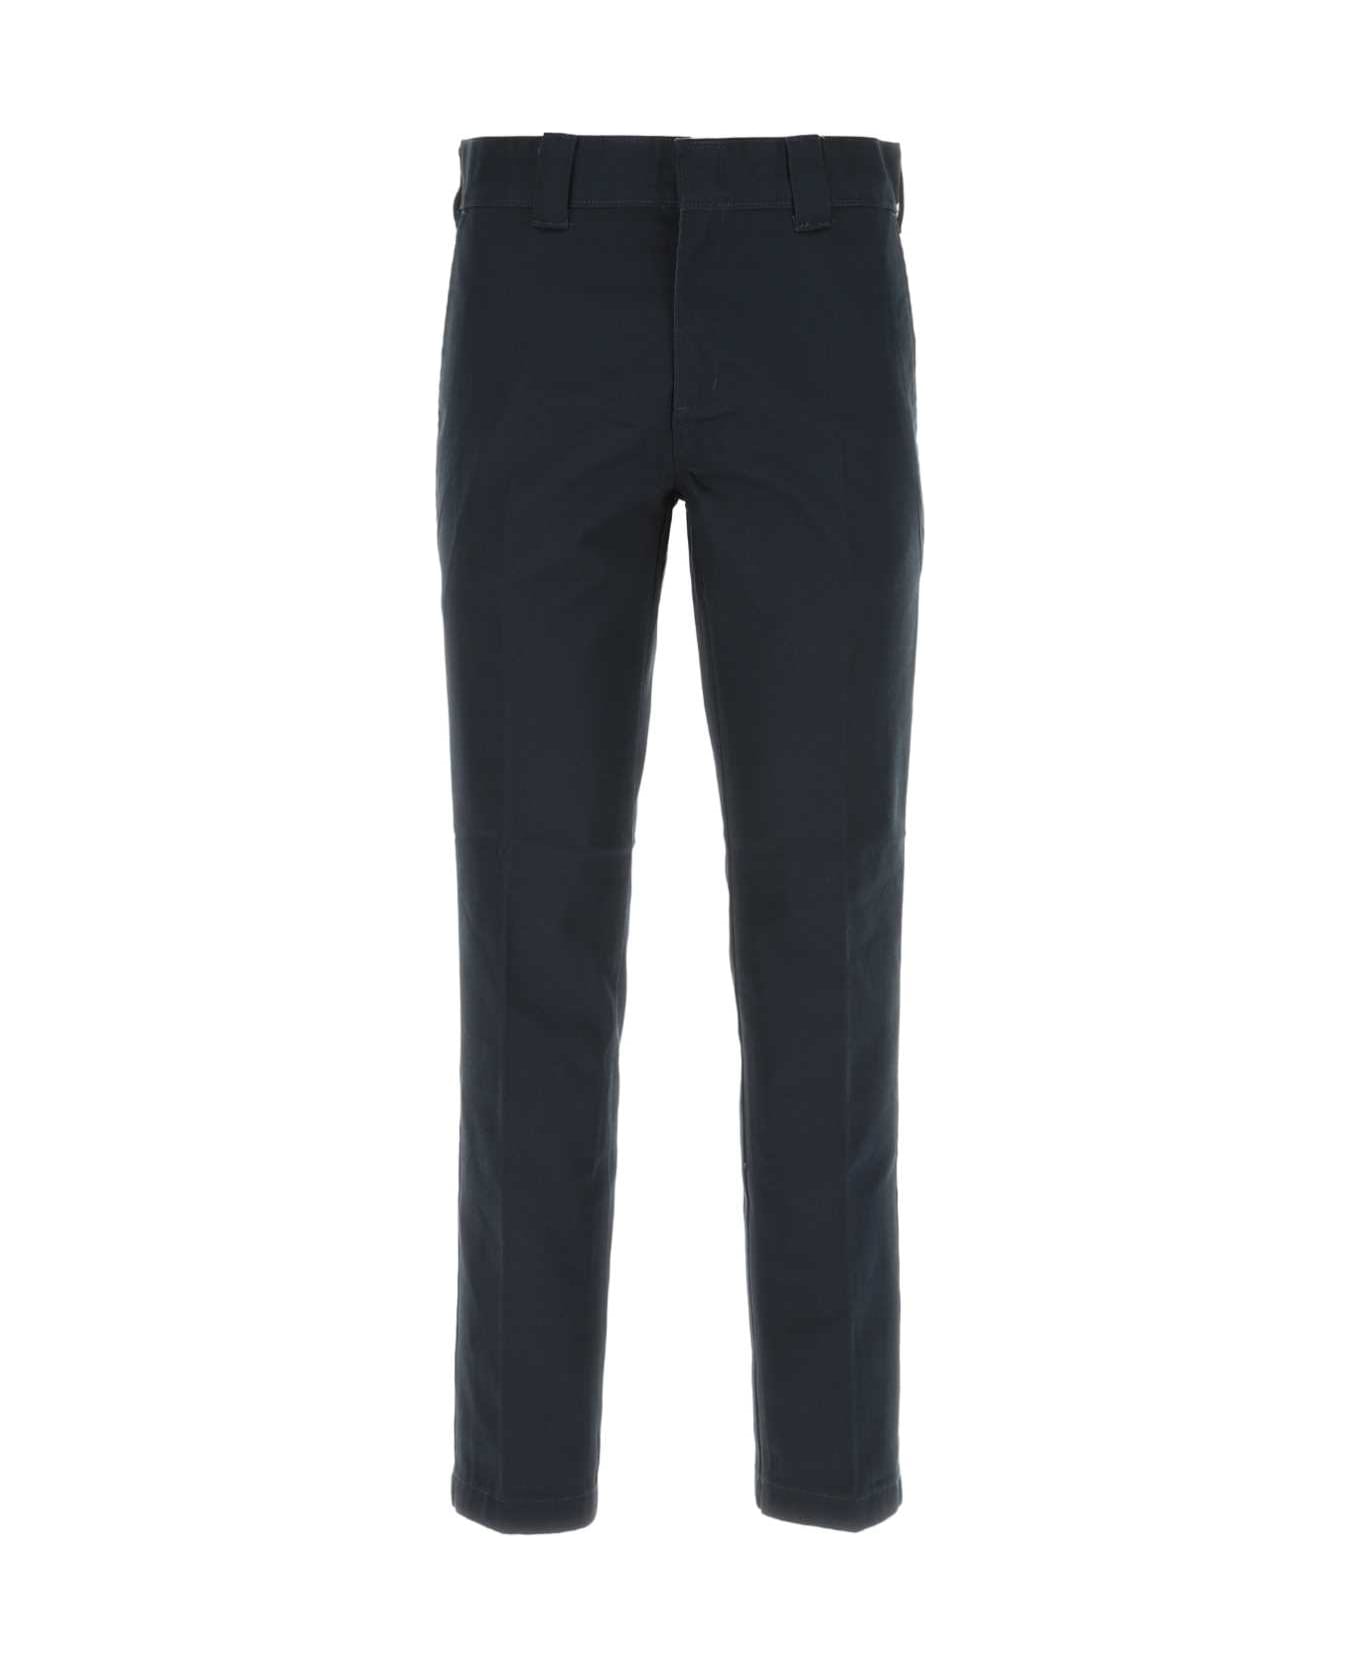 Dickies Midnight Blue Polyester Blend Pant - DNX1 ボトムス